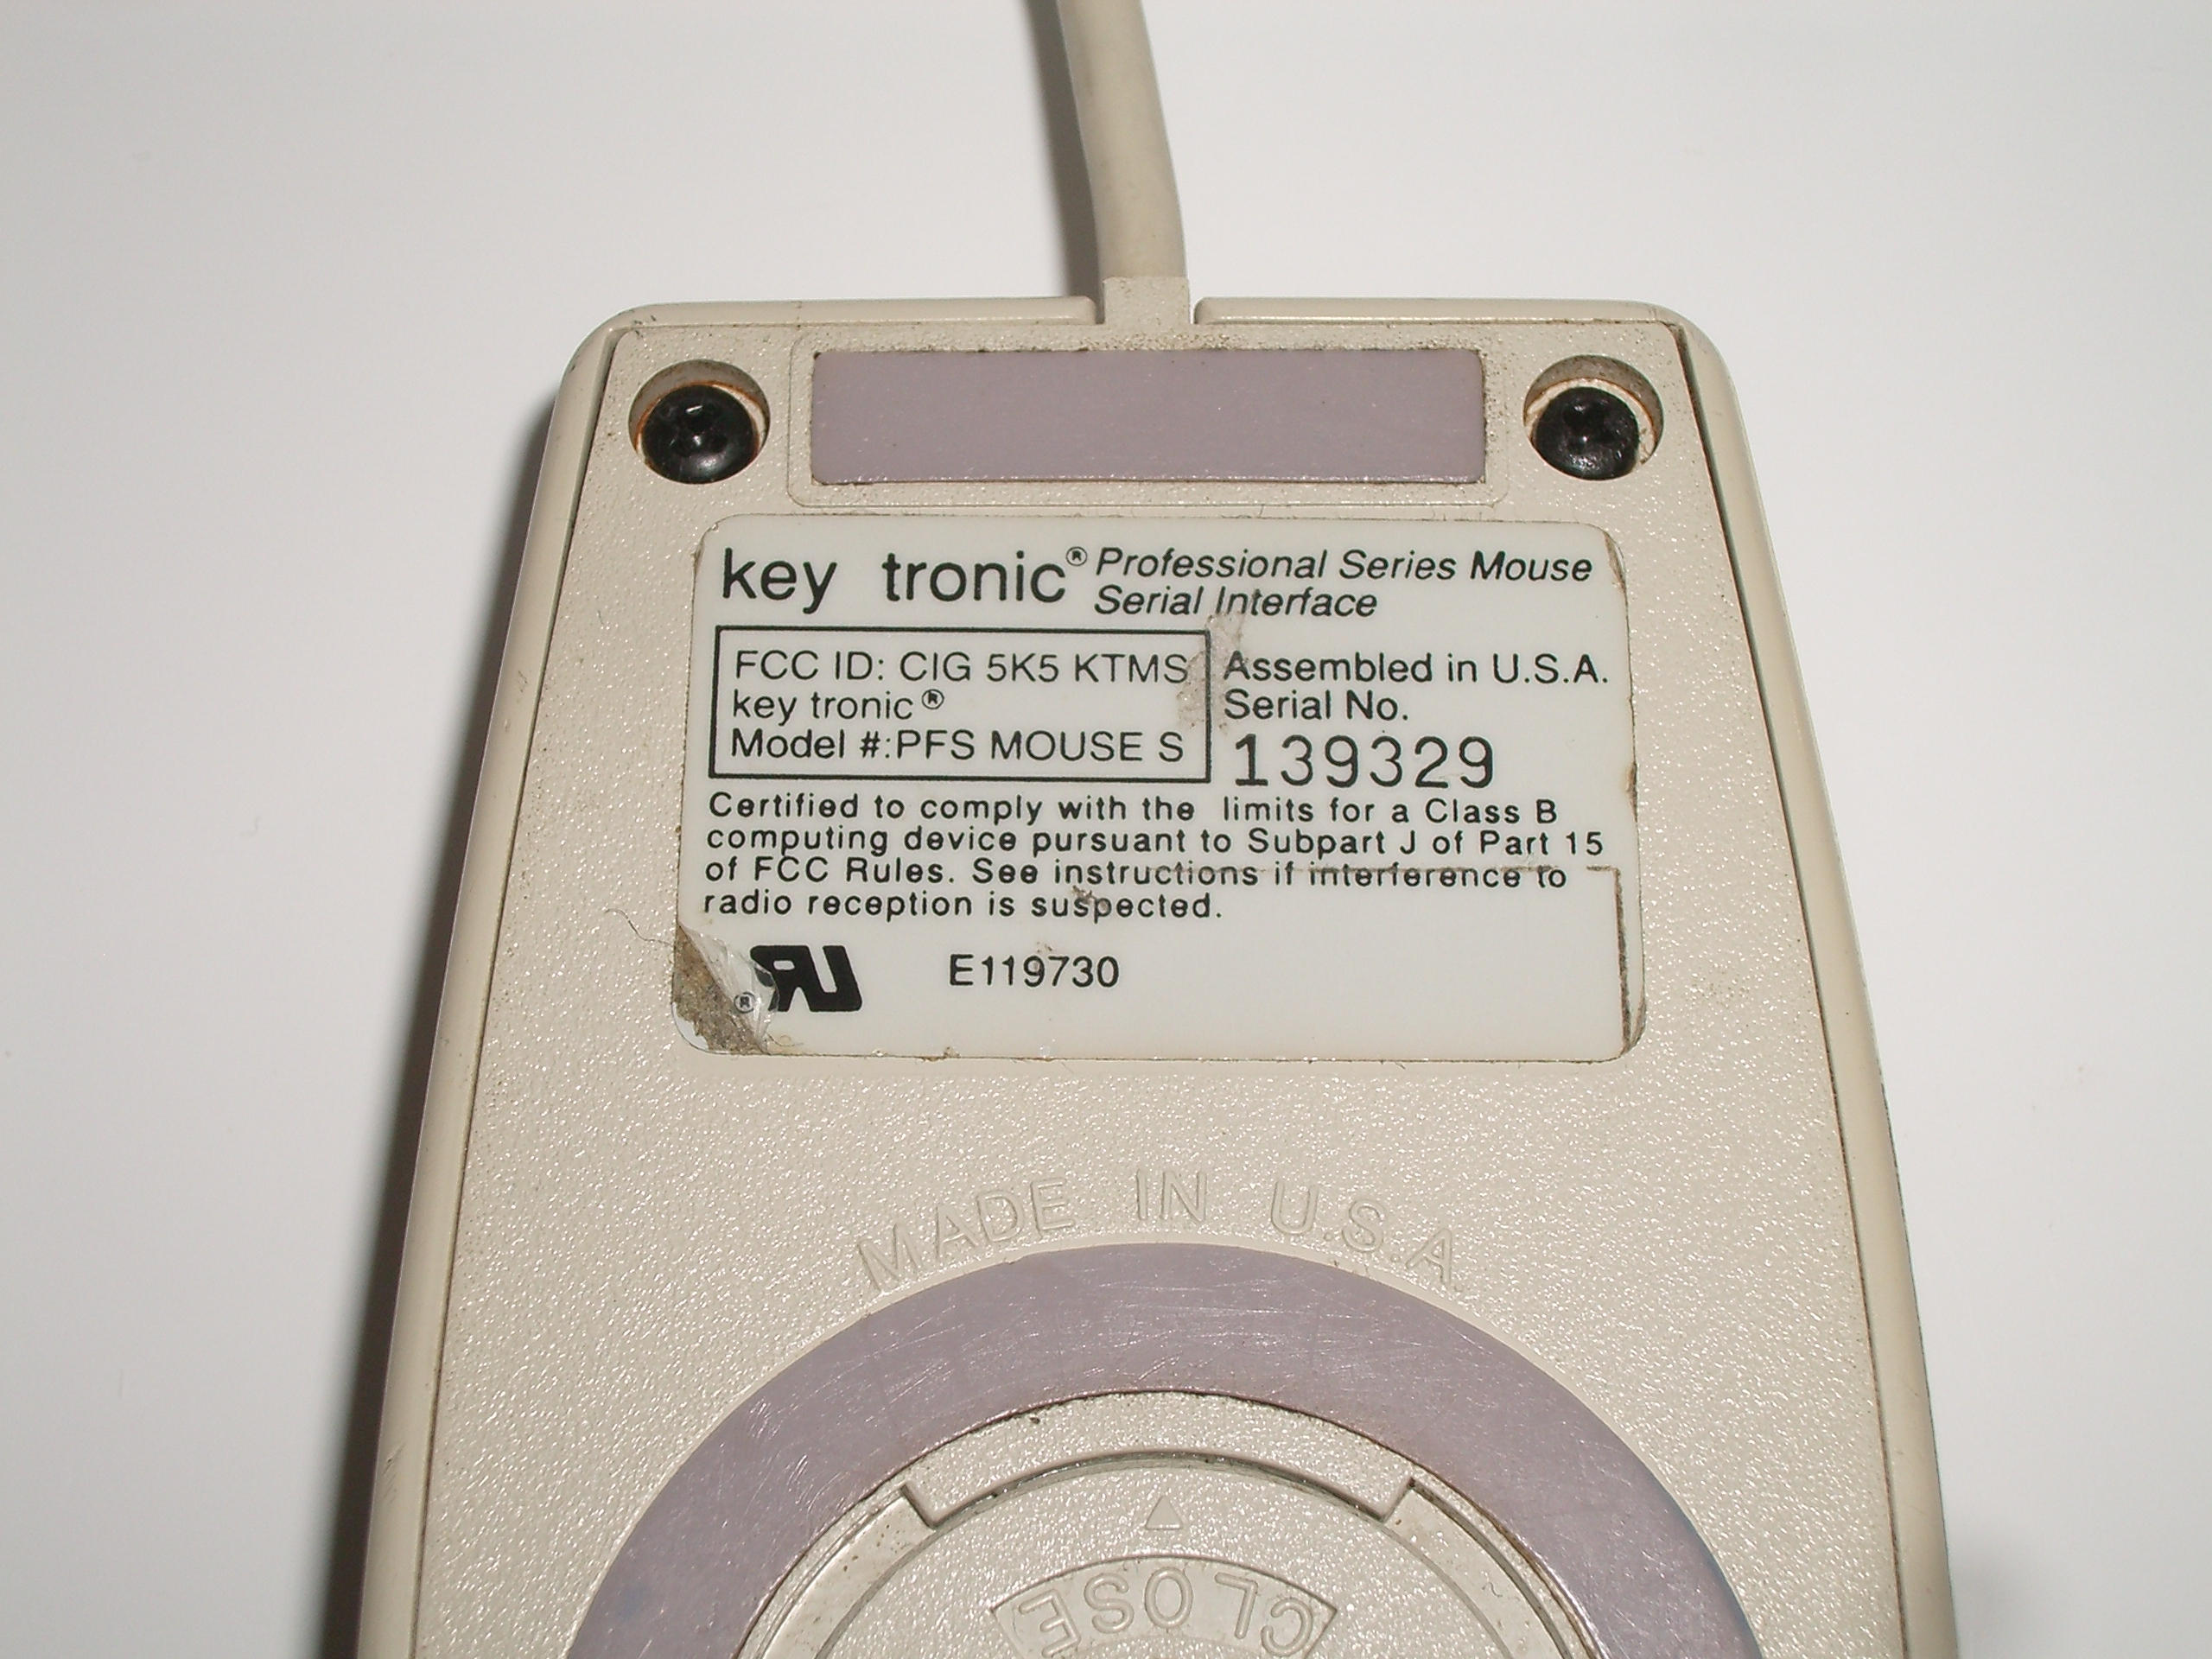 key tronic Professional Series Mouse -- product label.jpg